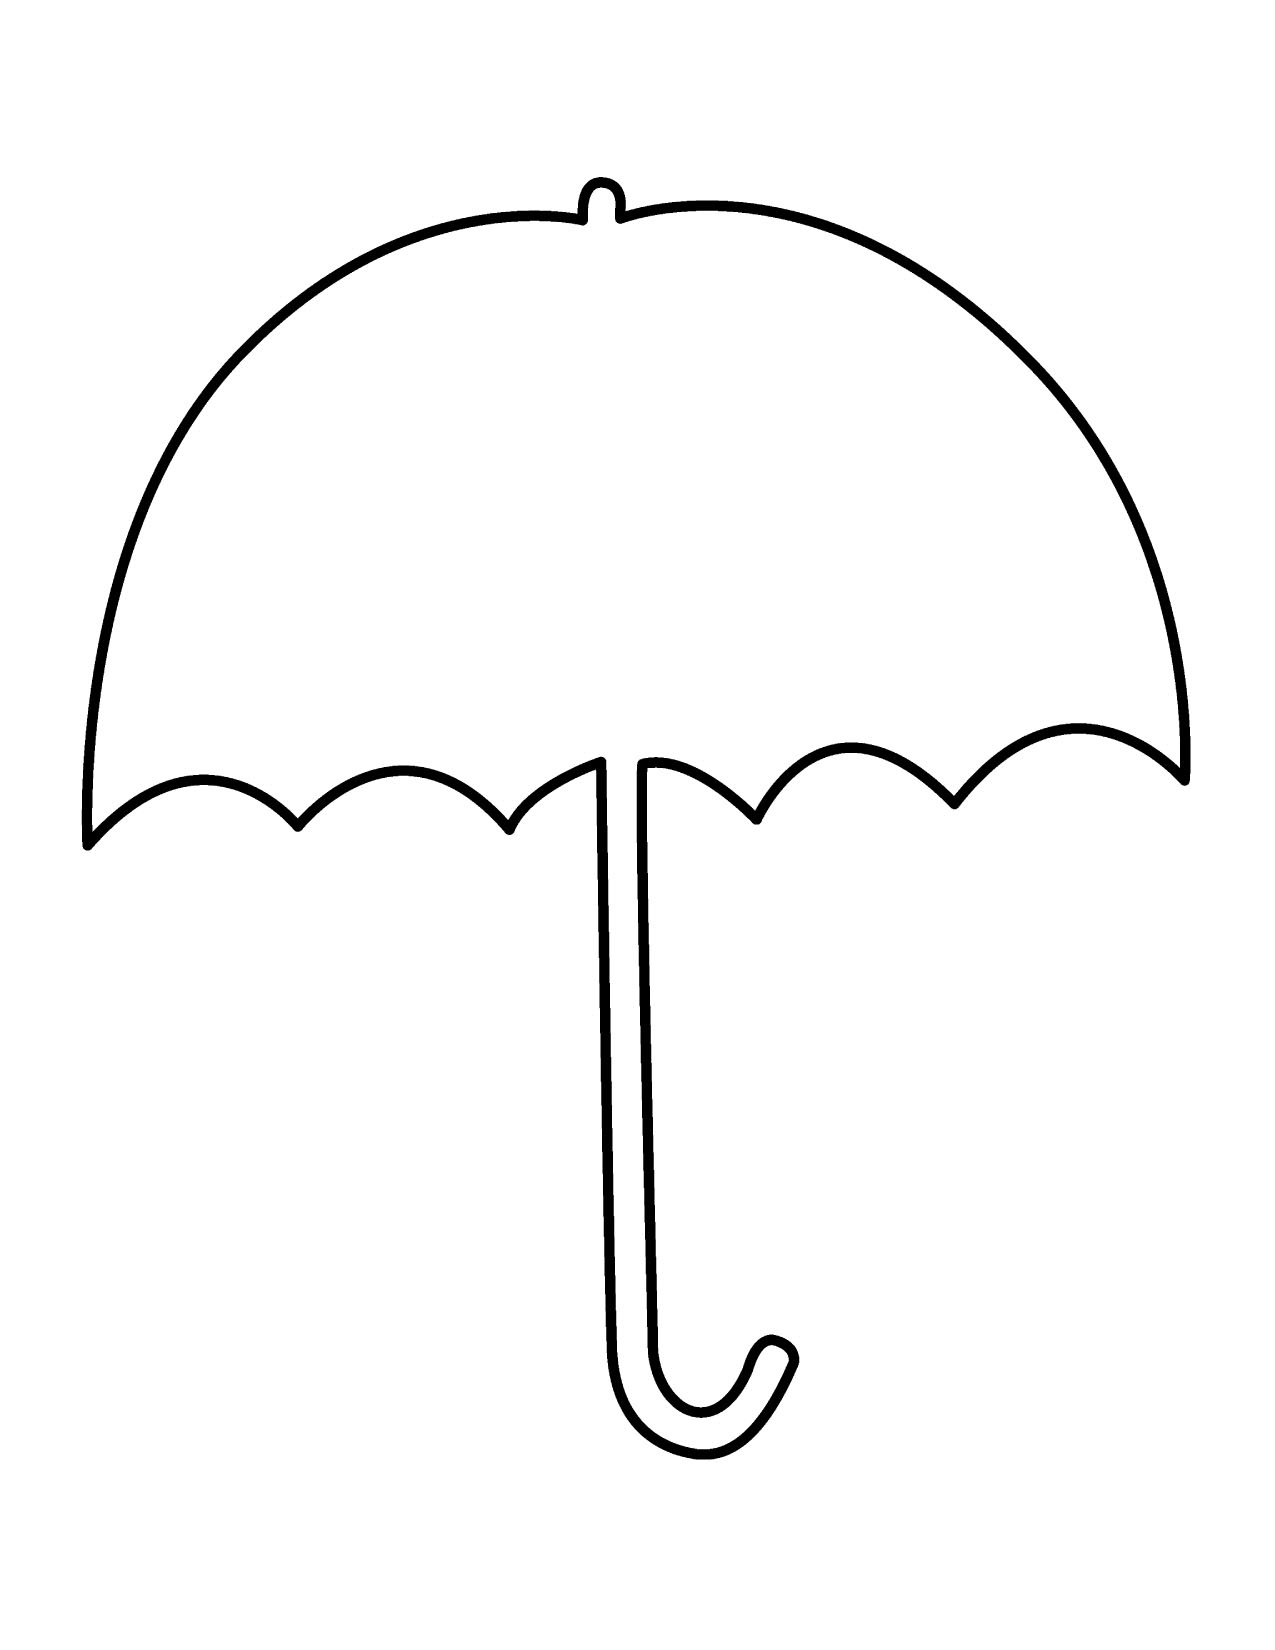 Picture Of An Umbrella